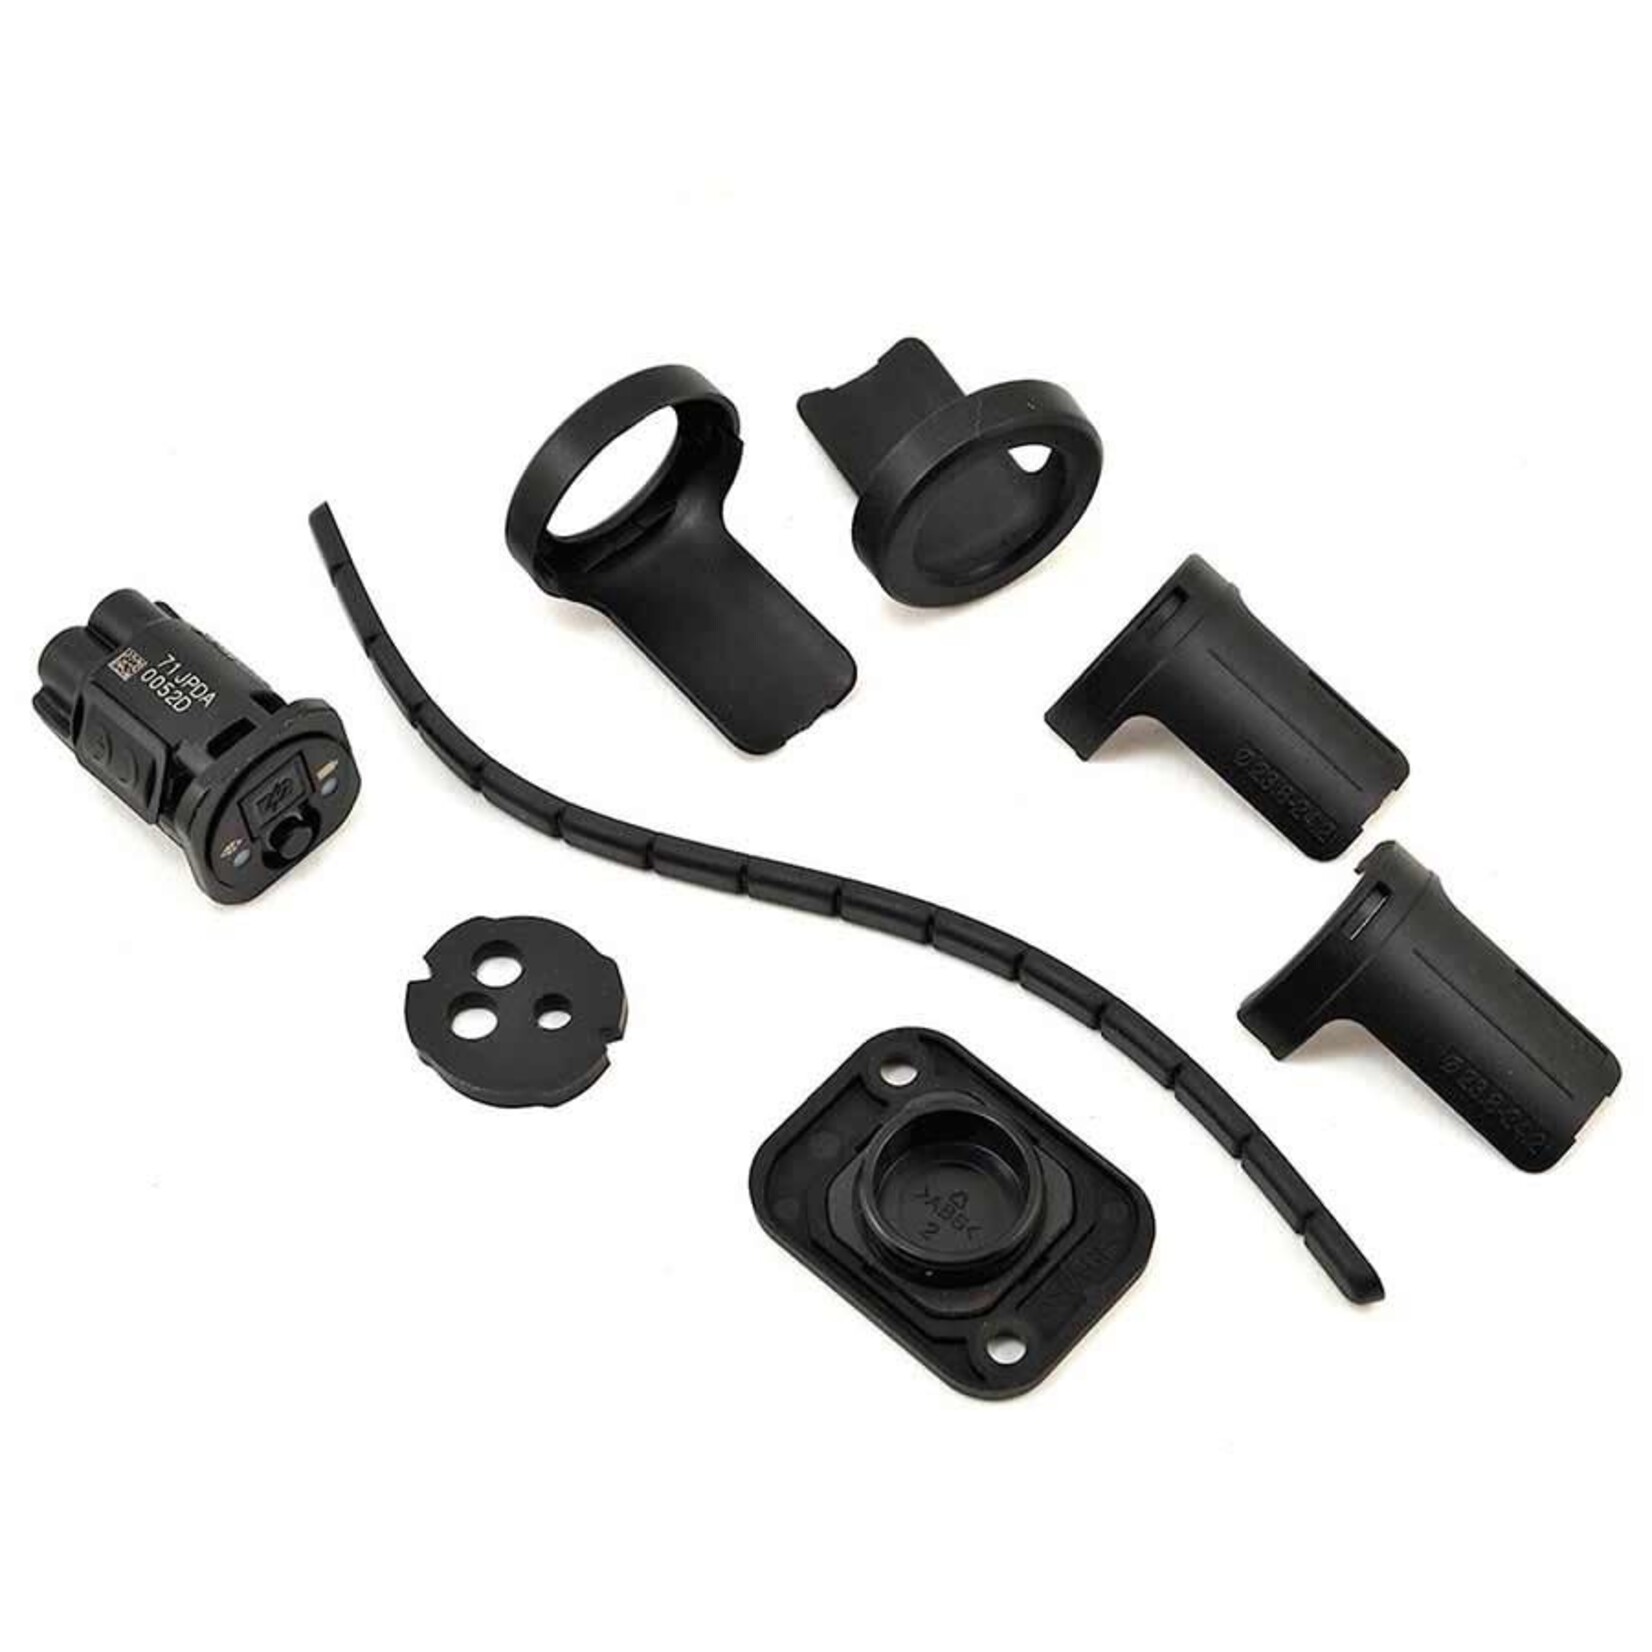 Shimano JUNCTION-A, EW-RS910, 2-PORT BUILT-IN TYPE, FOR HANDLEBAR